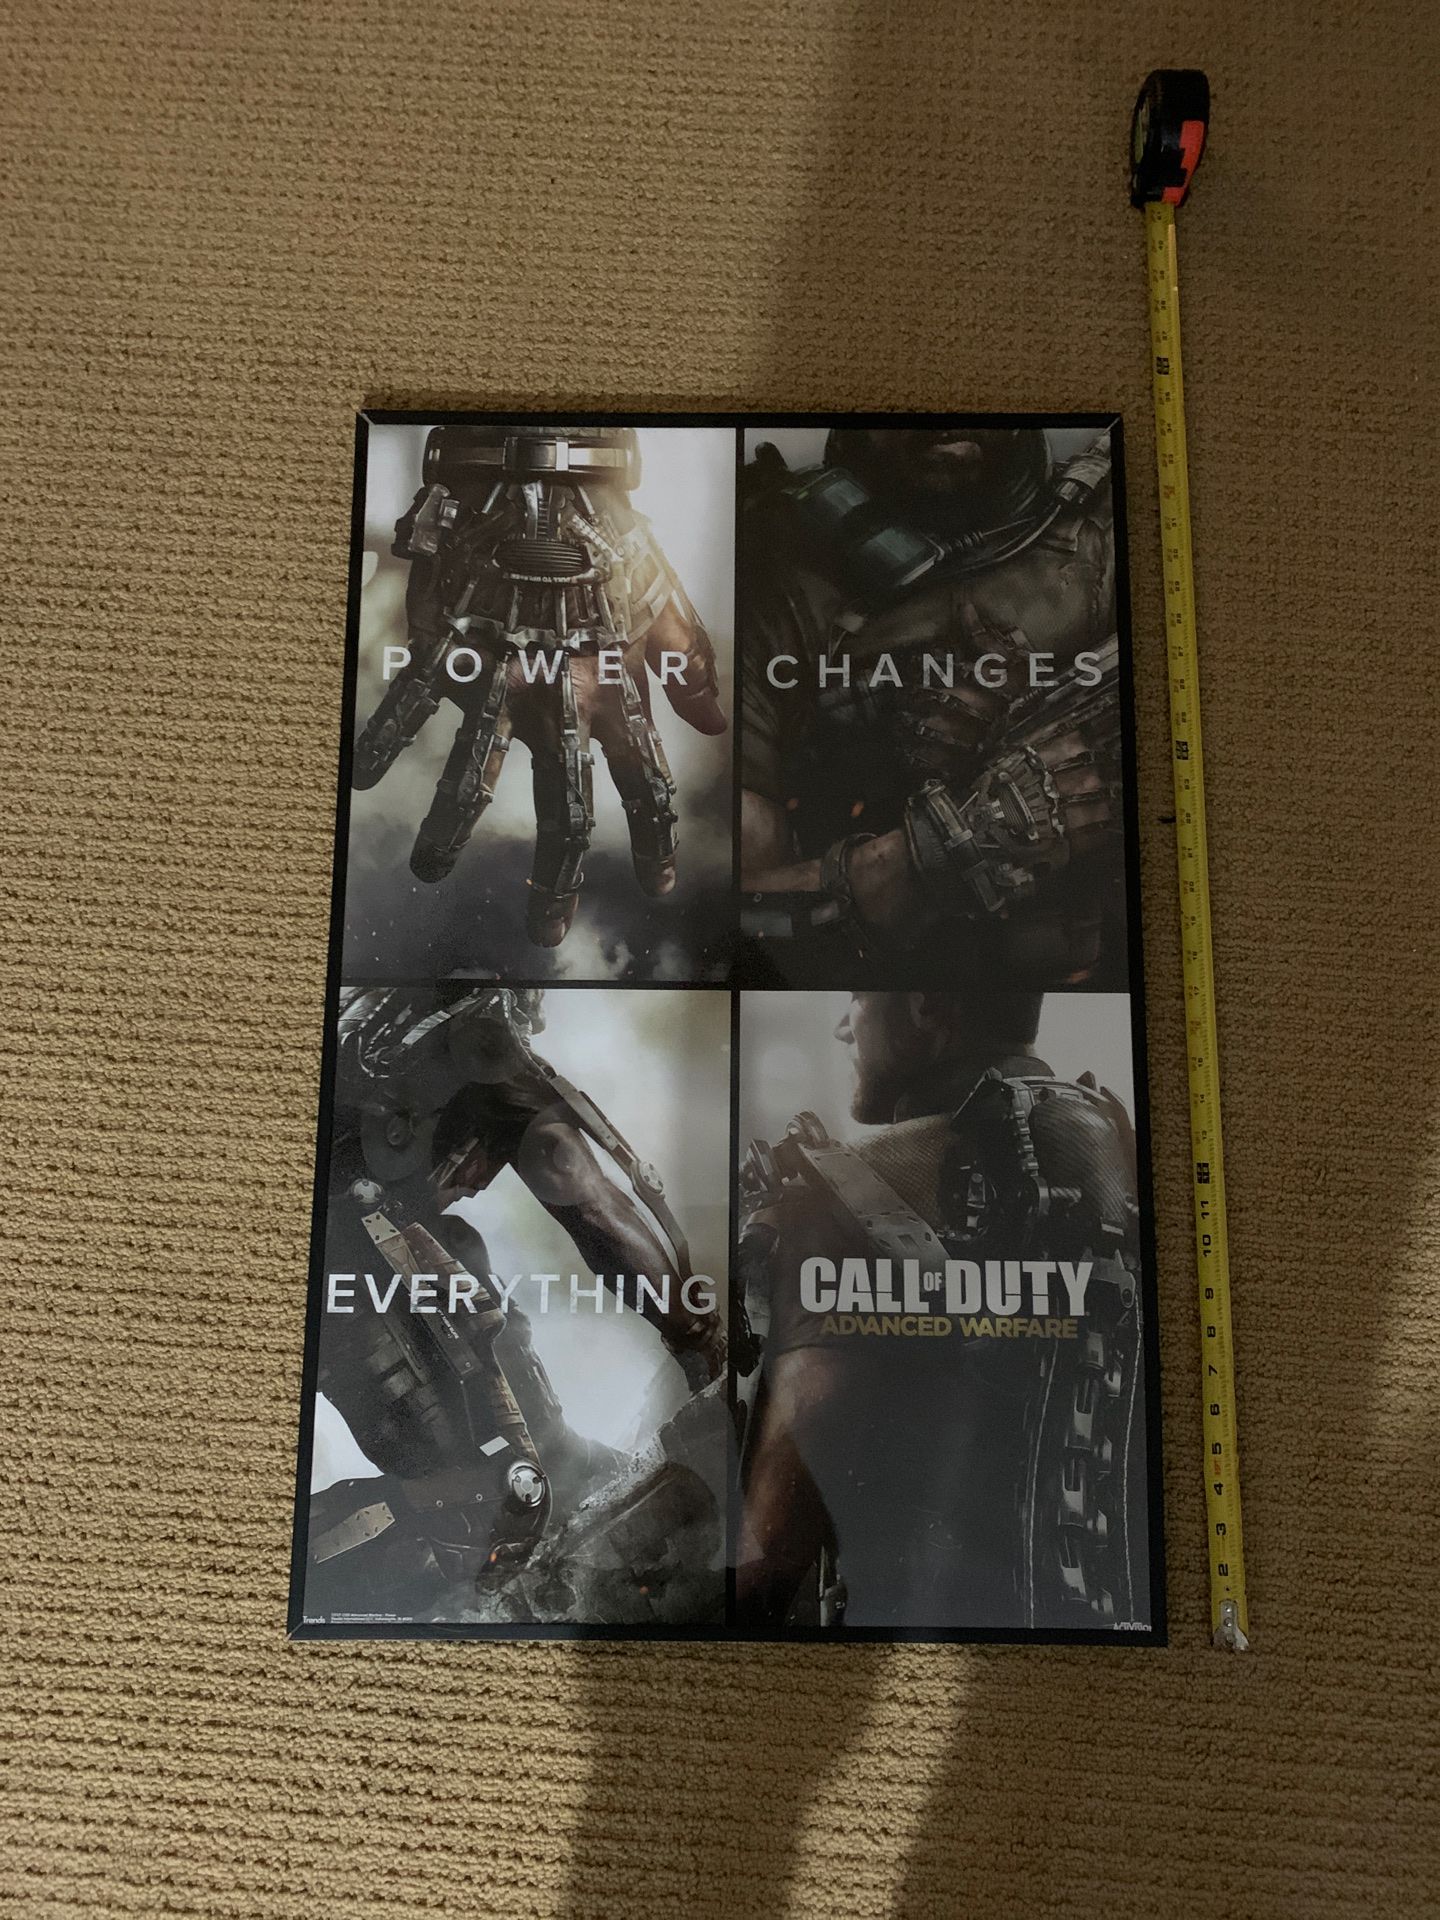 Framed call of duty posters